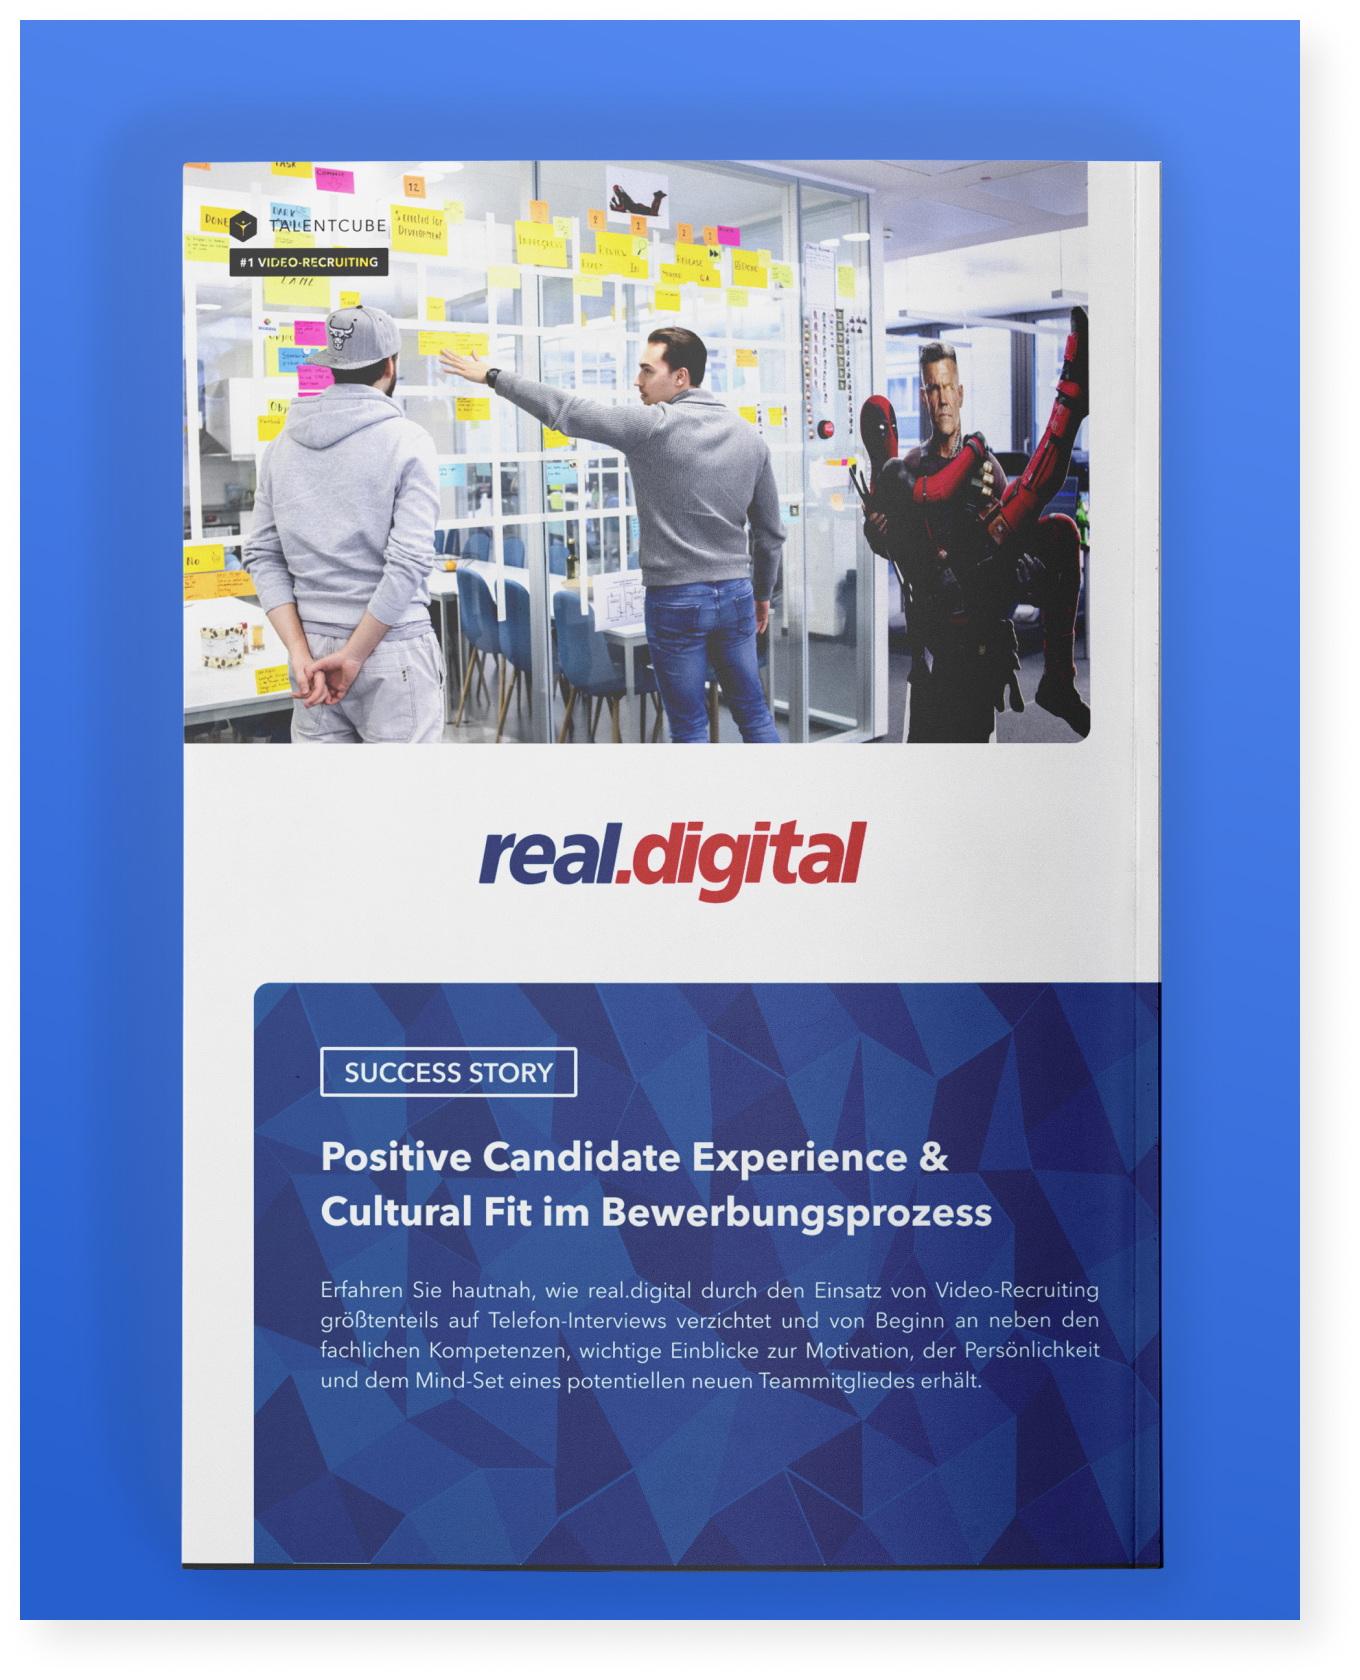 real.digital – Positive Candidate Experience & Cultural Fit